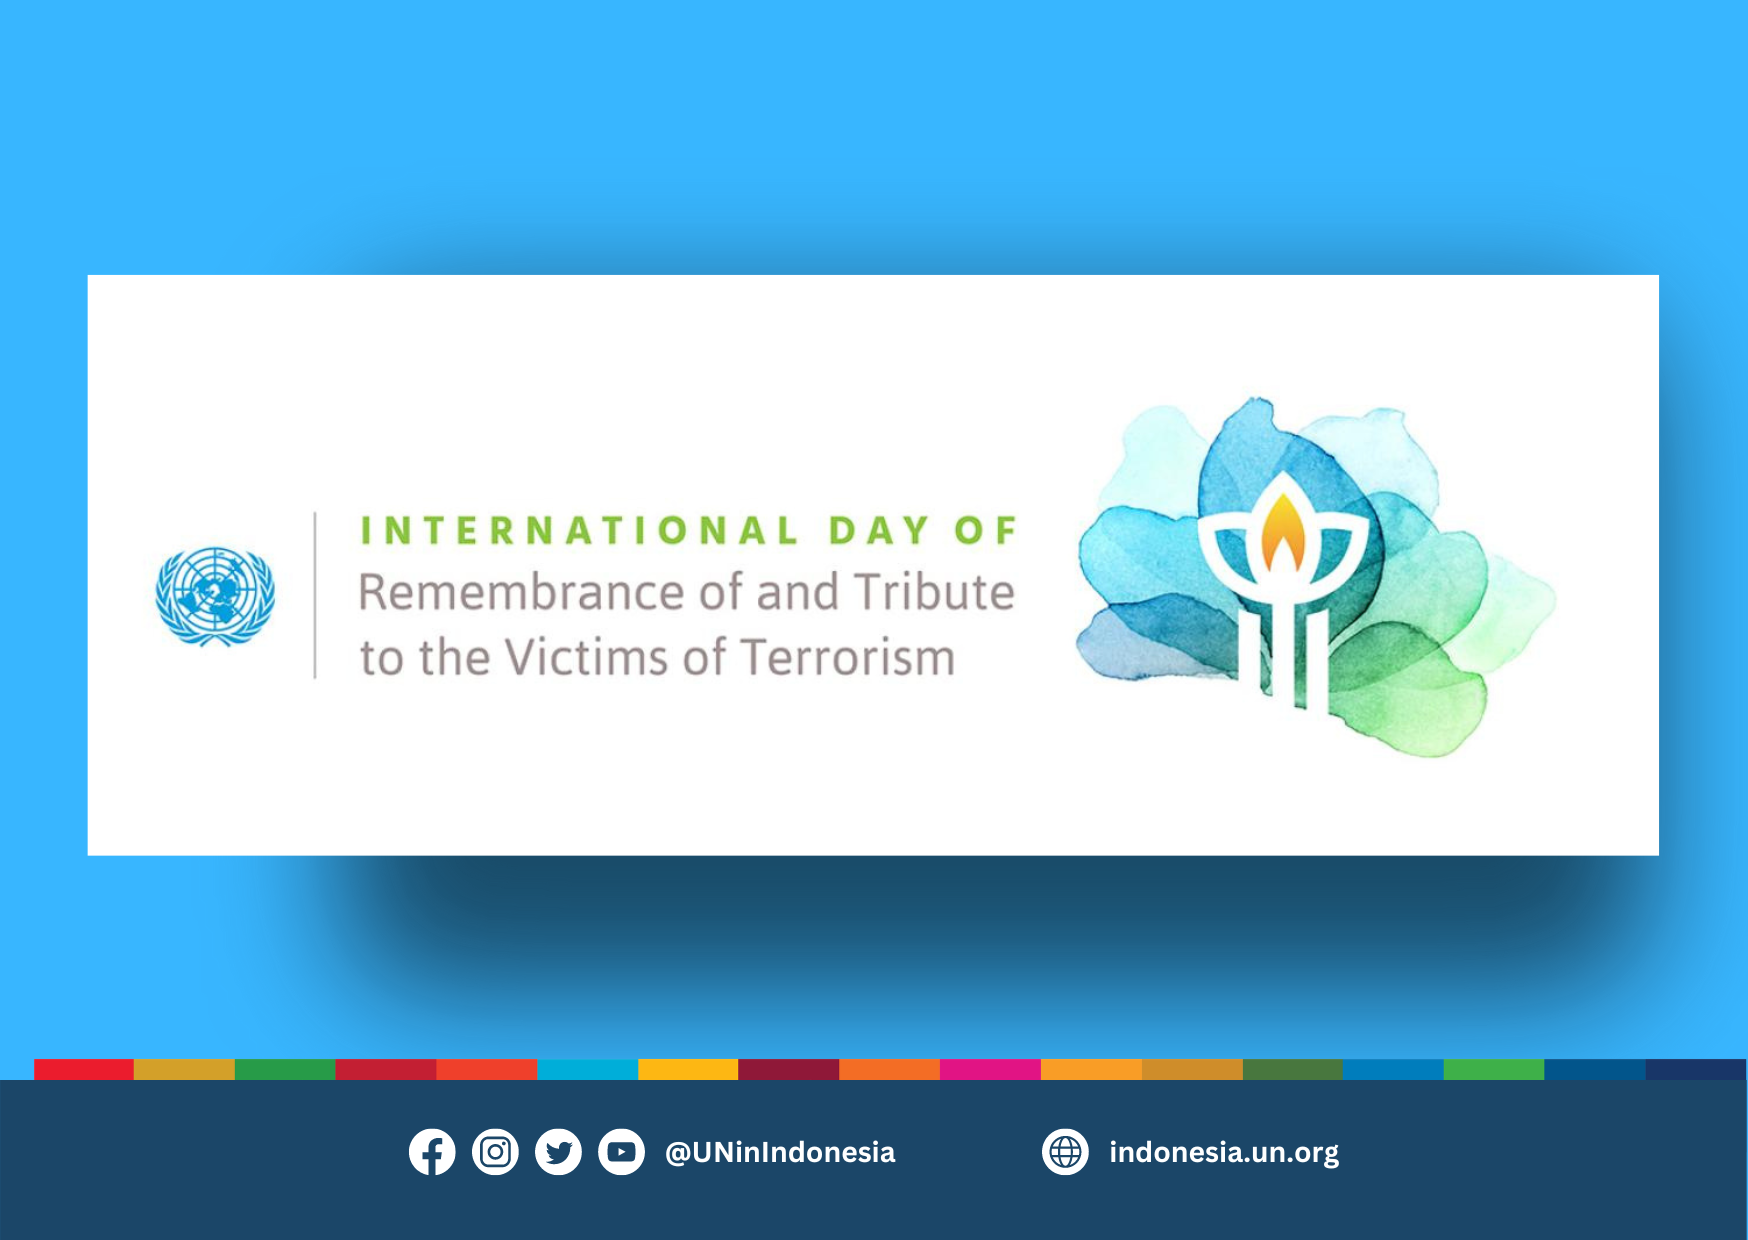 International Day of Remembrance and Tribute to the Victims of Terrorism 21 August